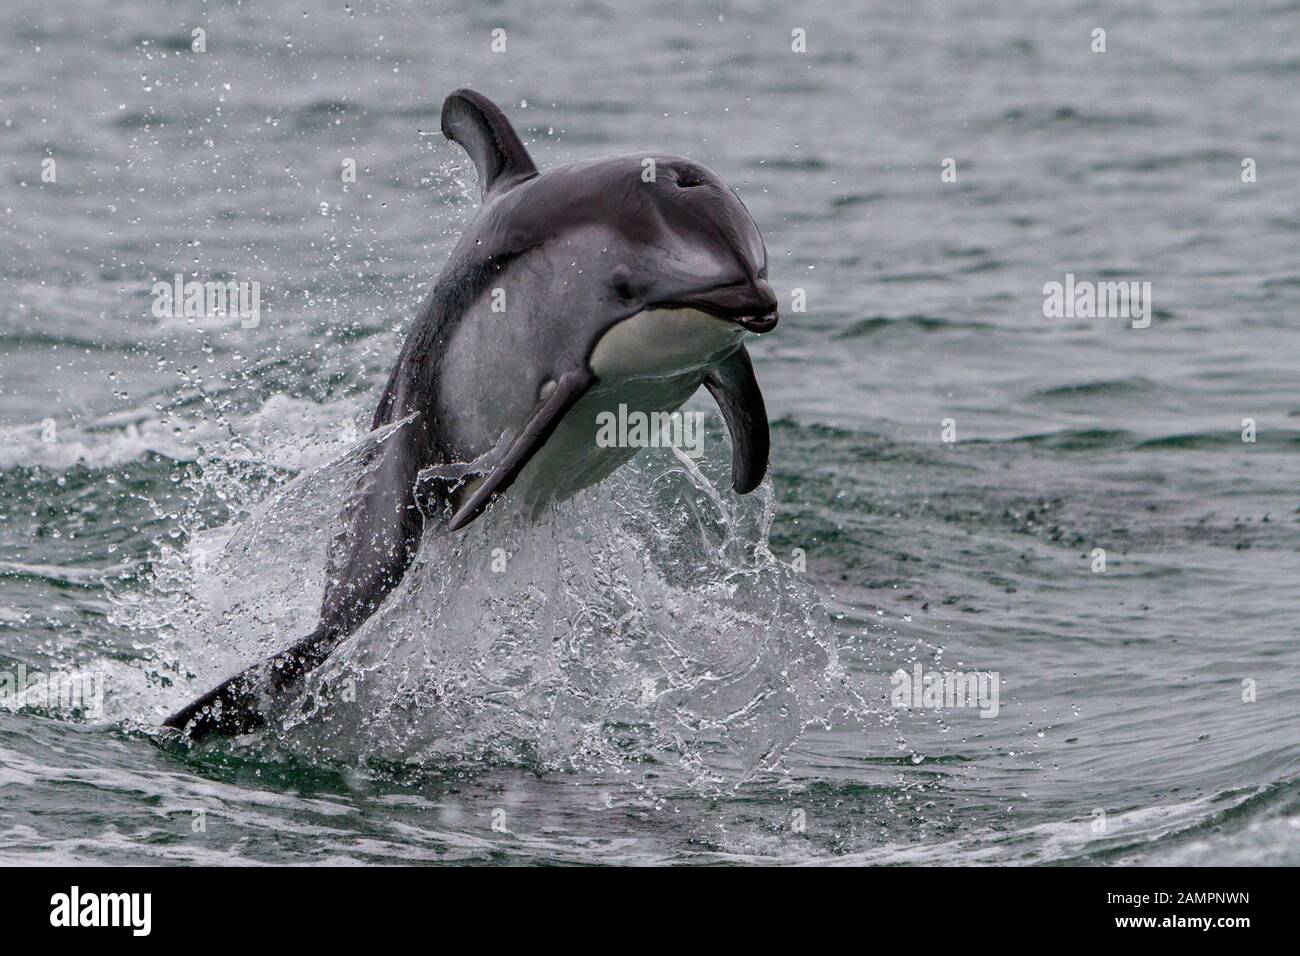 Pacific white-sided dolphin jumping along the Broughton Archipelago, First Nations Territory off Vancouver Island, British Columbia, Canada. Stock Photo